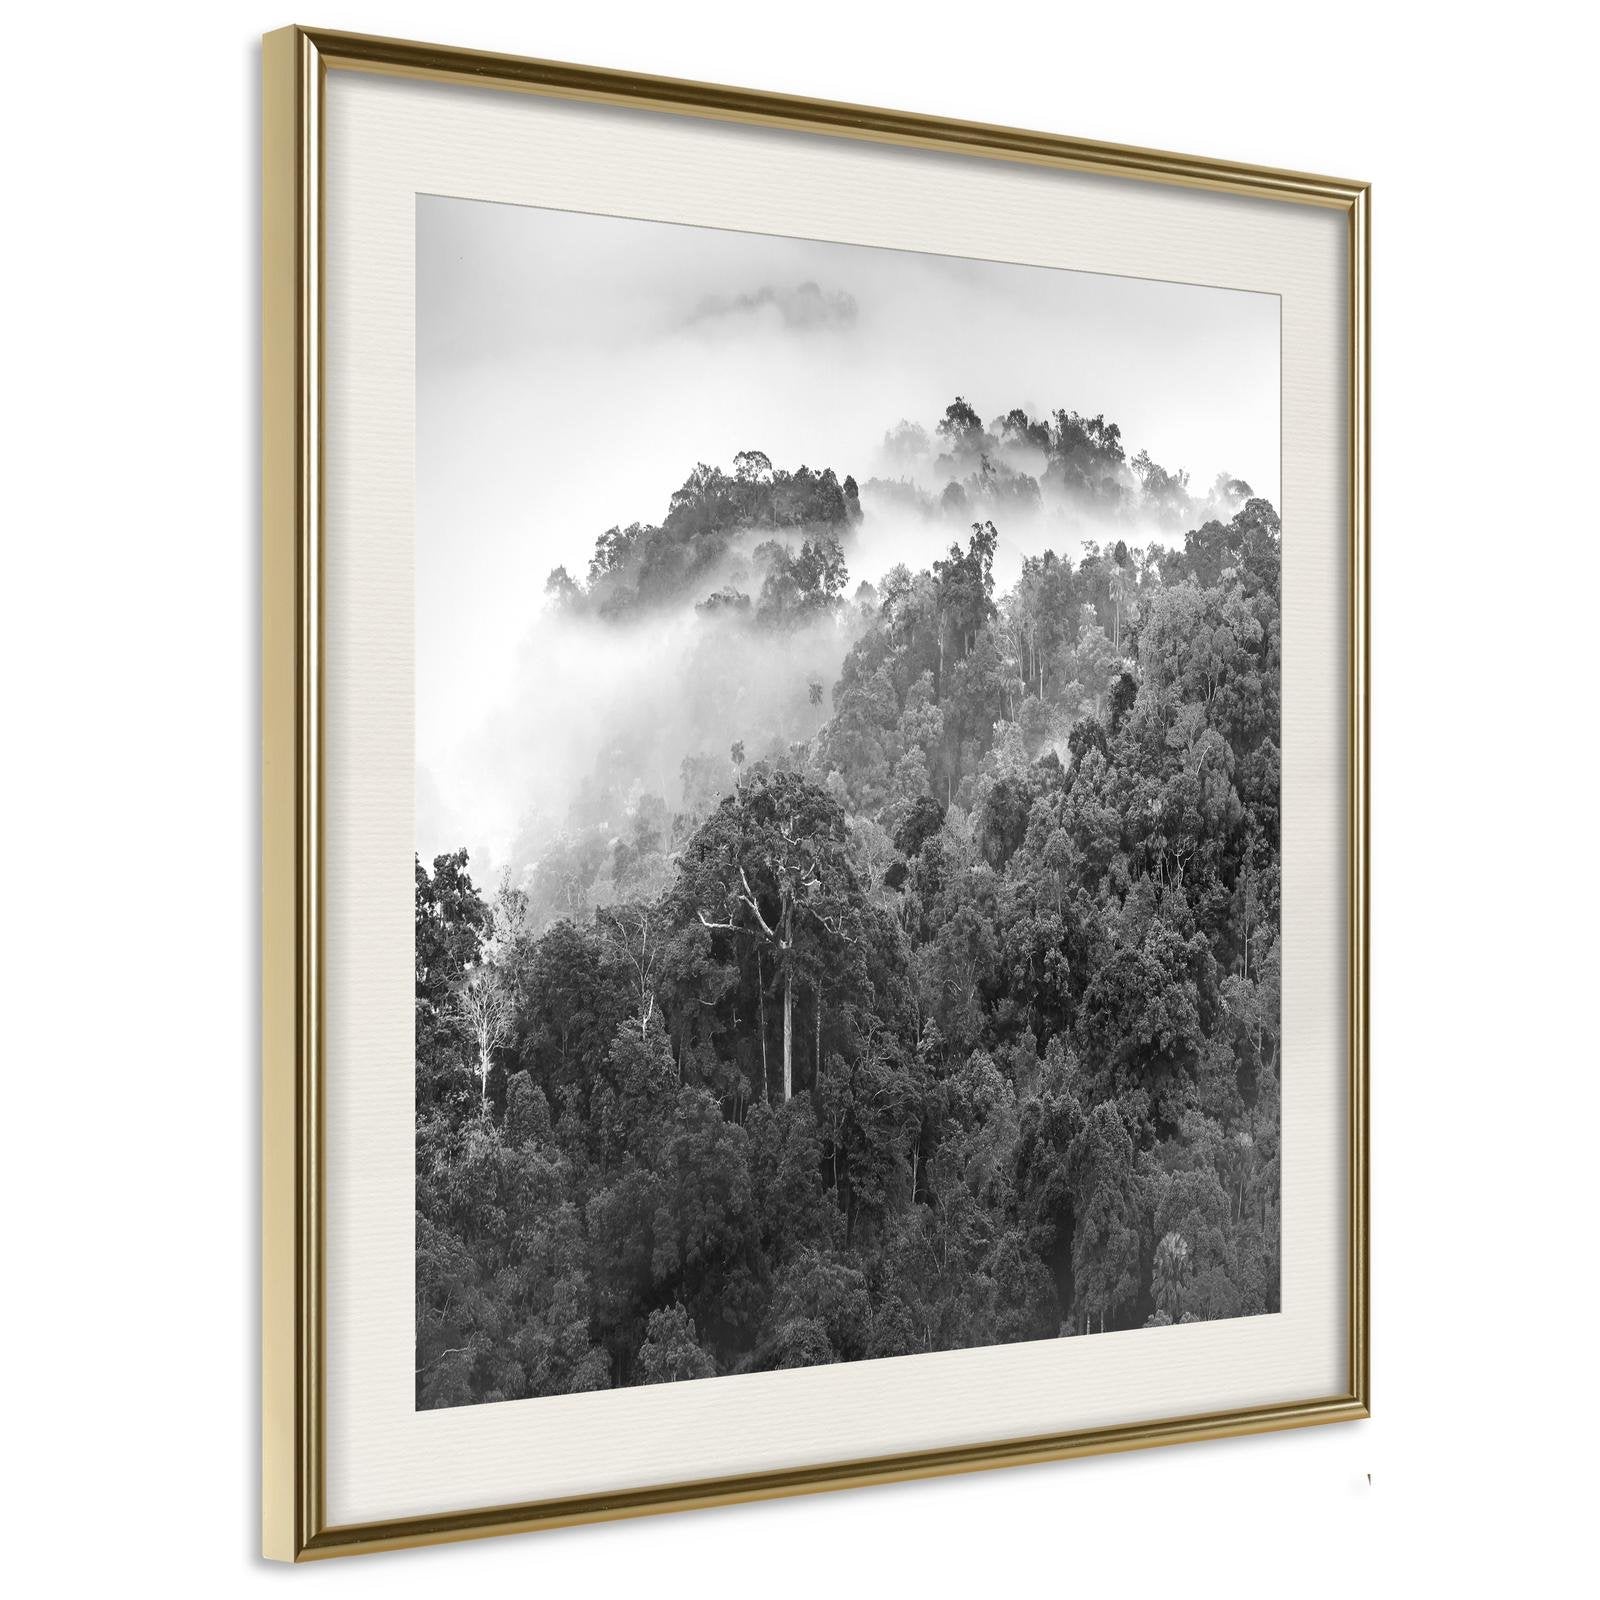 Inramad Poster / Tavla - Foggy Forest-Poster Inramad-Artgeist-20x20-Guldram med passepartout-peaceofhome.se